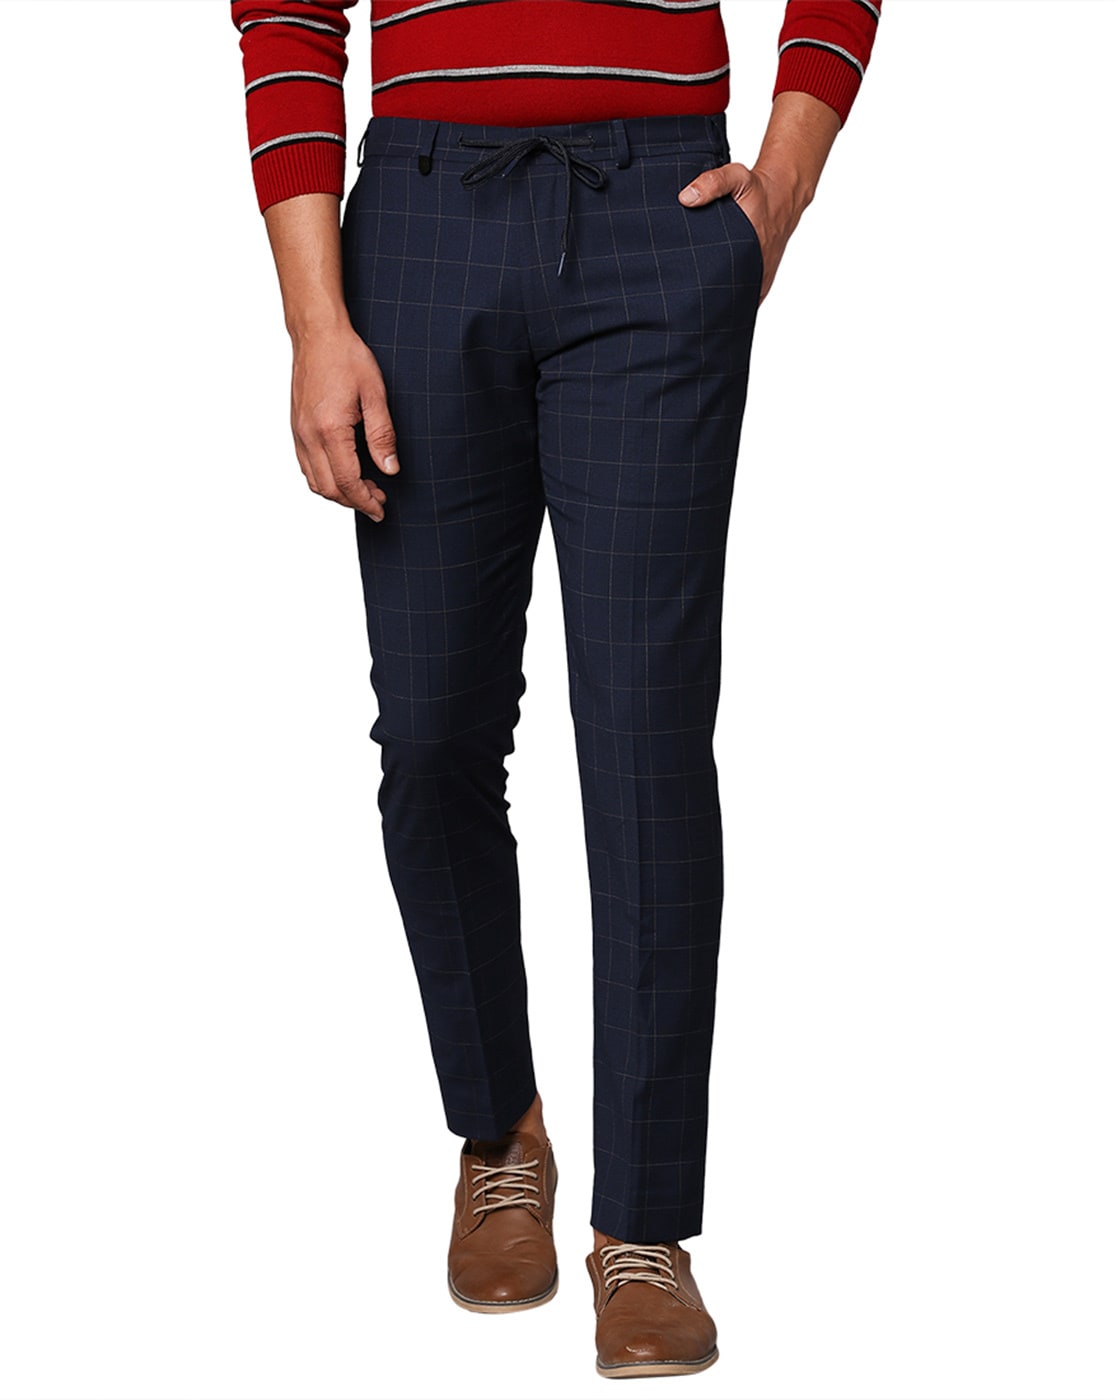 Buy Park Avenue Trousers Online in India at Best Price